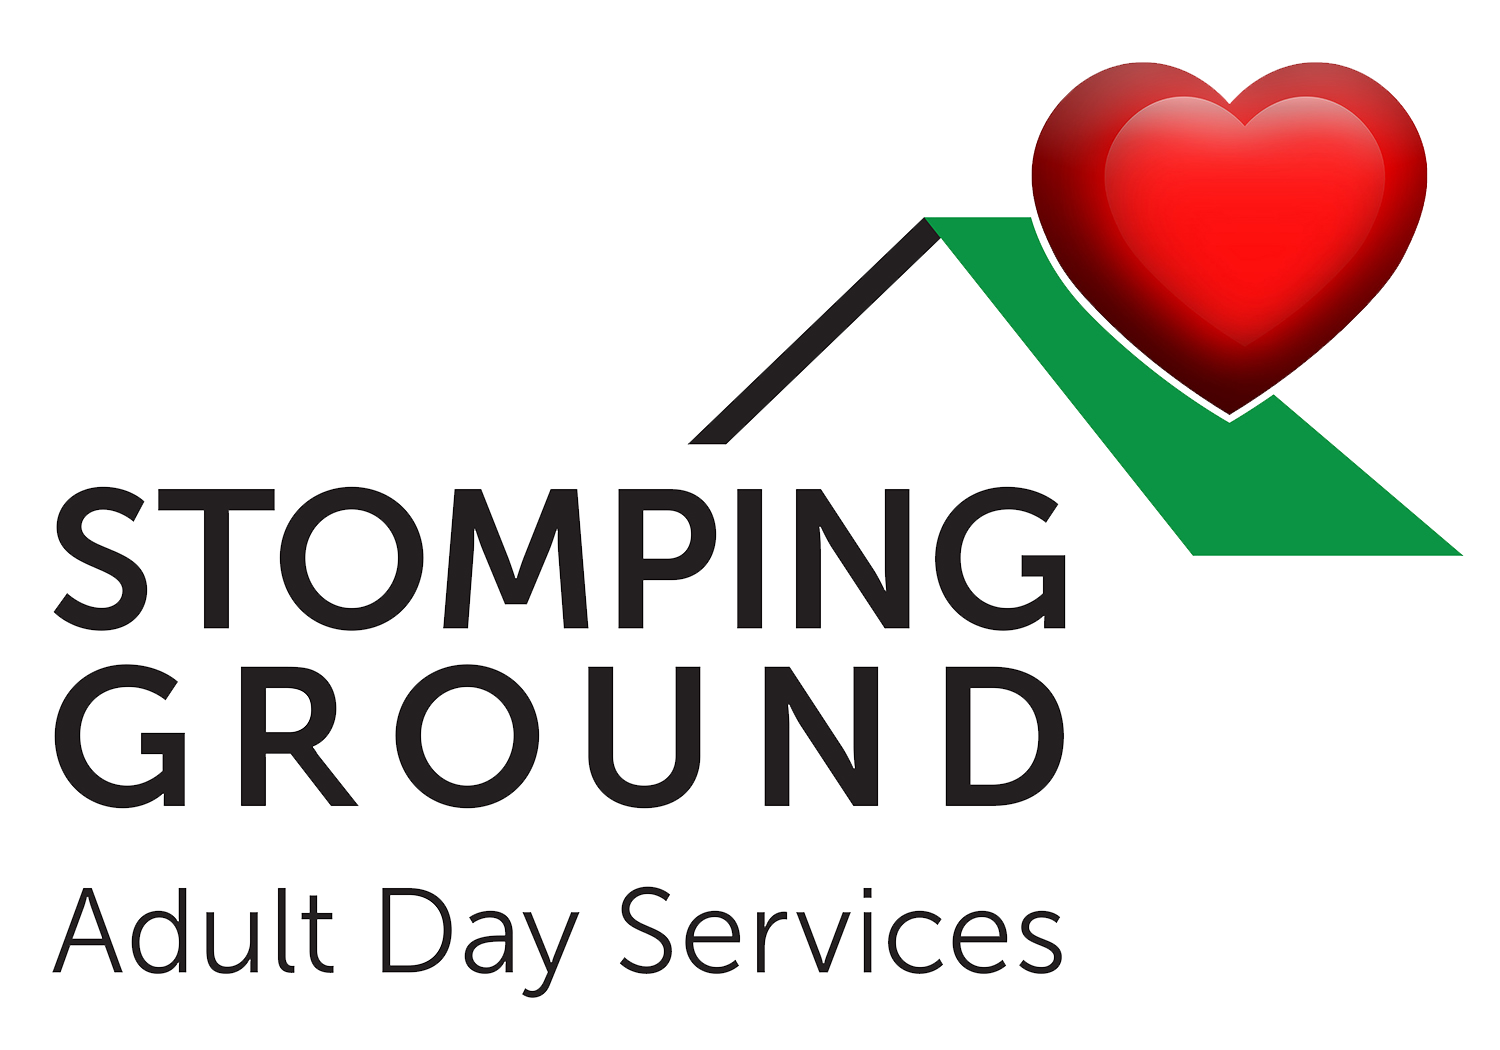 Stomping Ground Adult Day Services logo